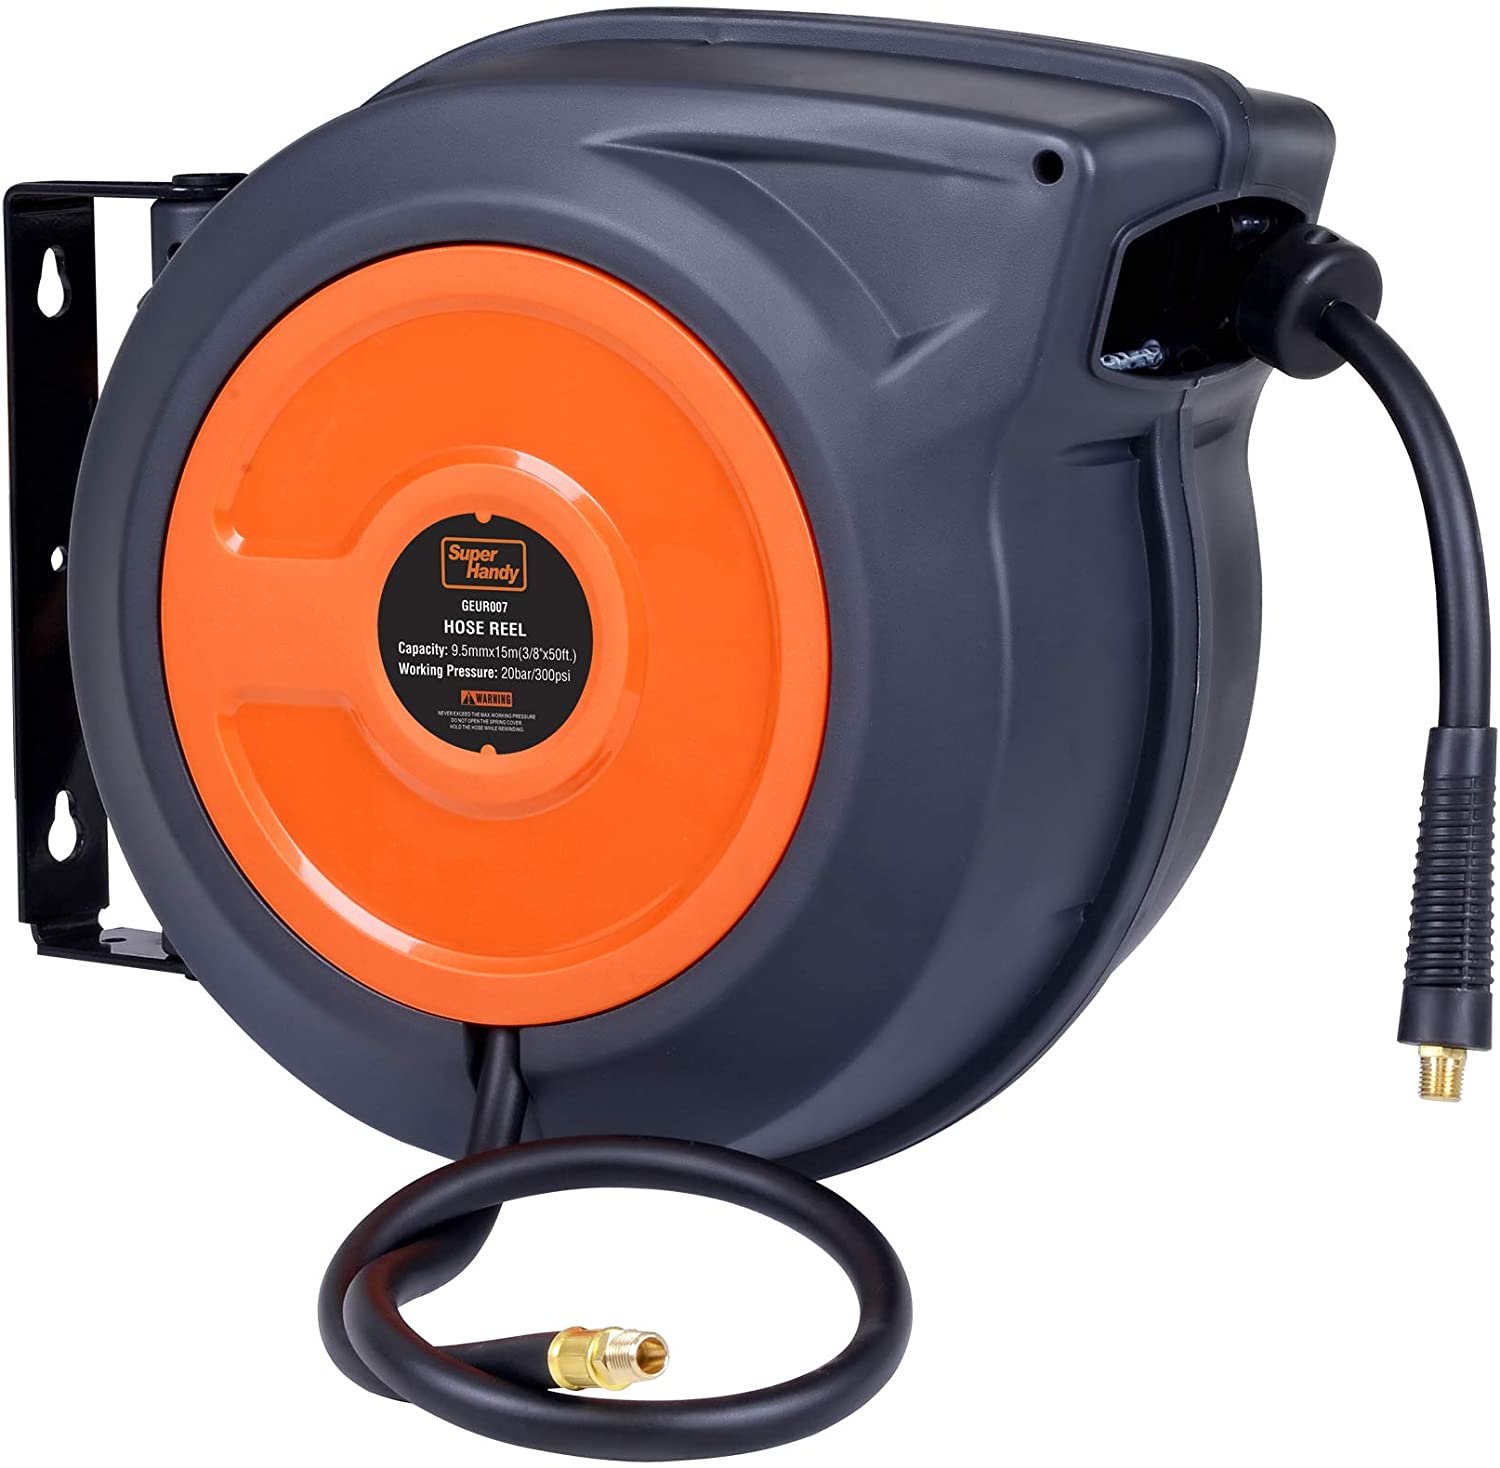 Retractable Air or Water 50 Ft Hose Reel - 3/8 Hose, Blue Case